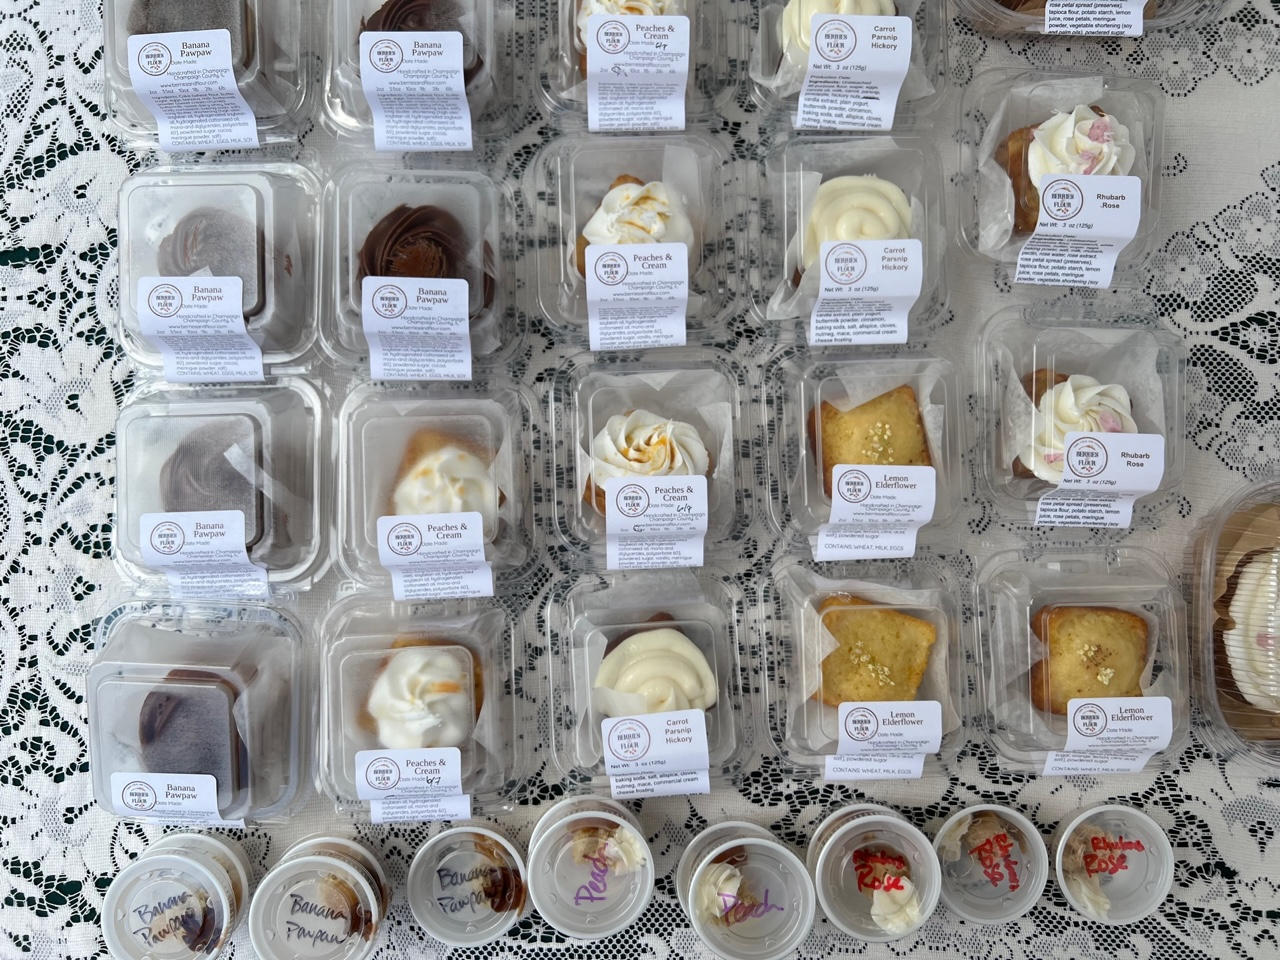 On a lacy tablecloth, there are mini cakes for sale at the market. Photo by Alyssa Buckley.